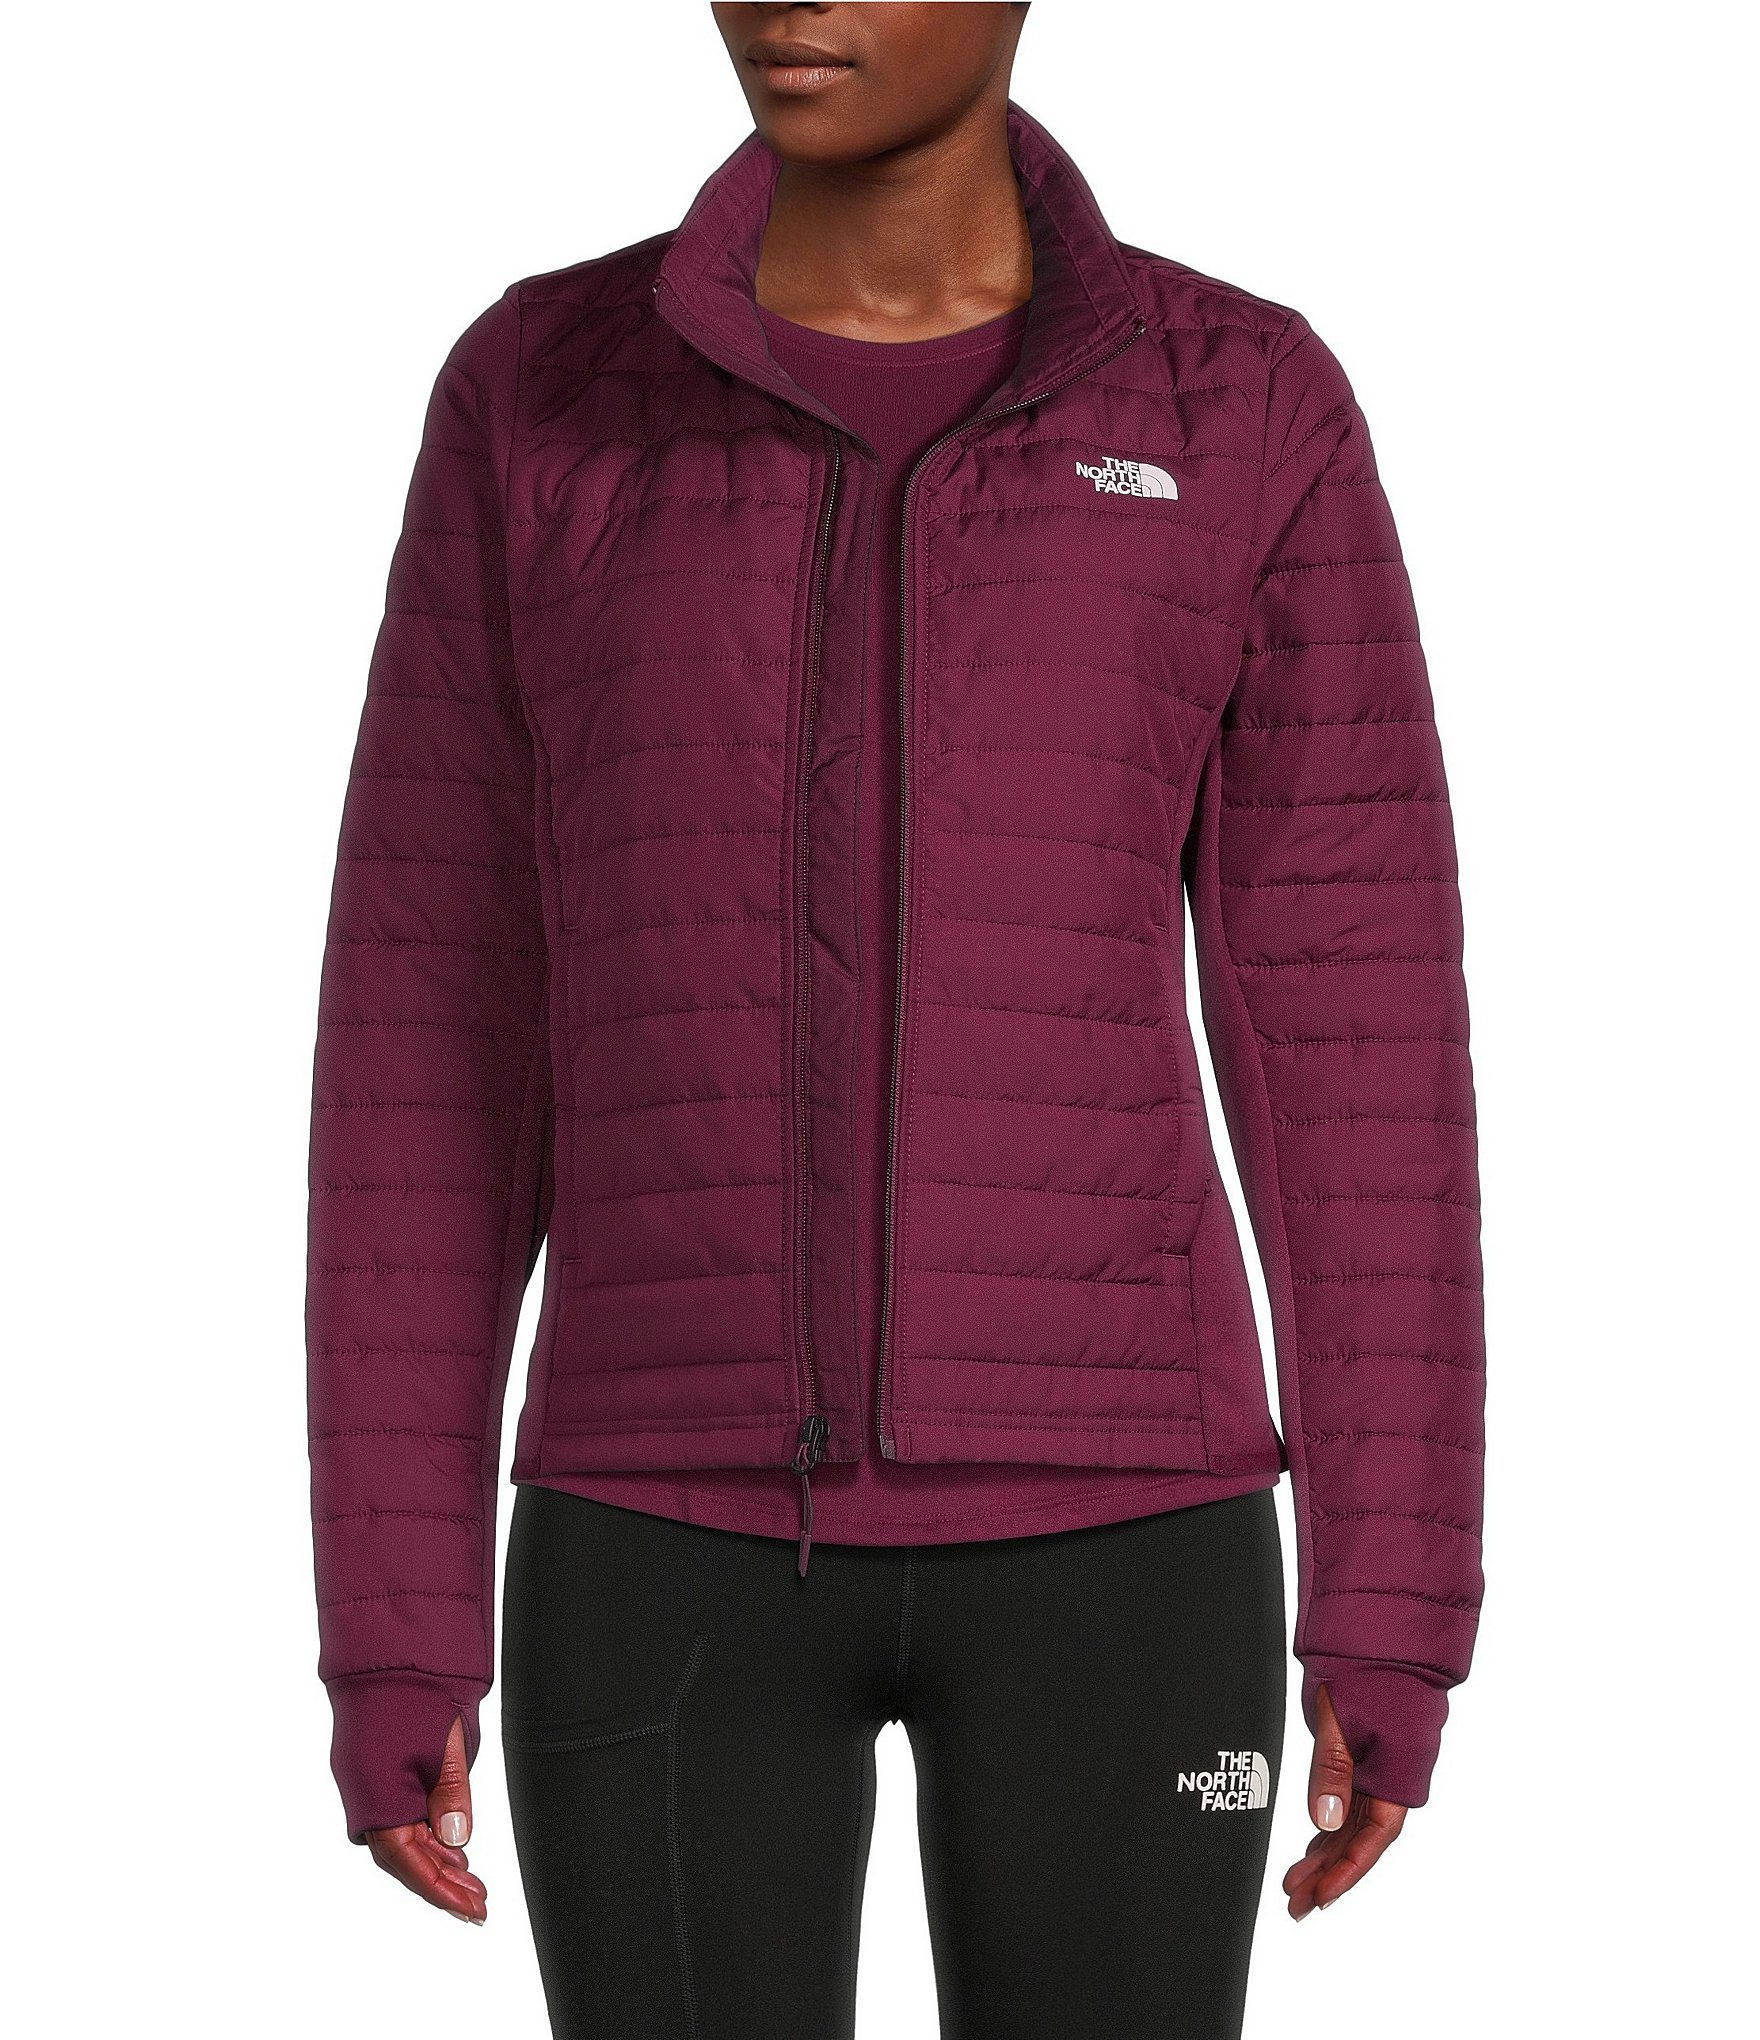 The North Face Canyonlands Hybrid Insulated Jacket | Dillard's